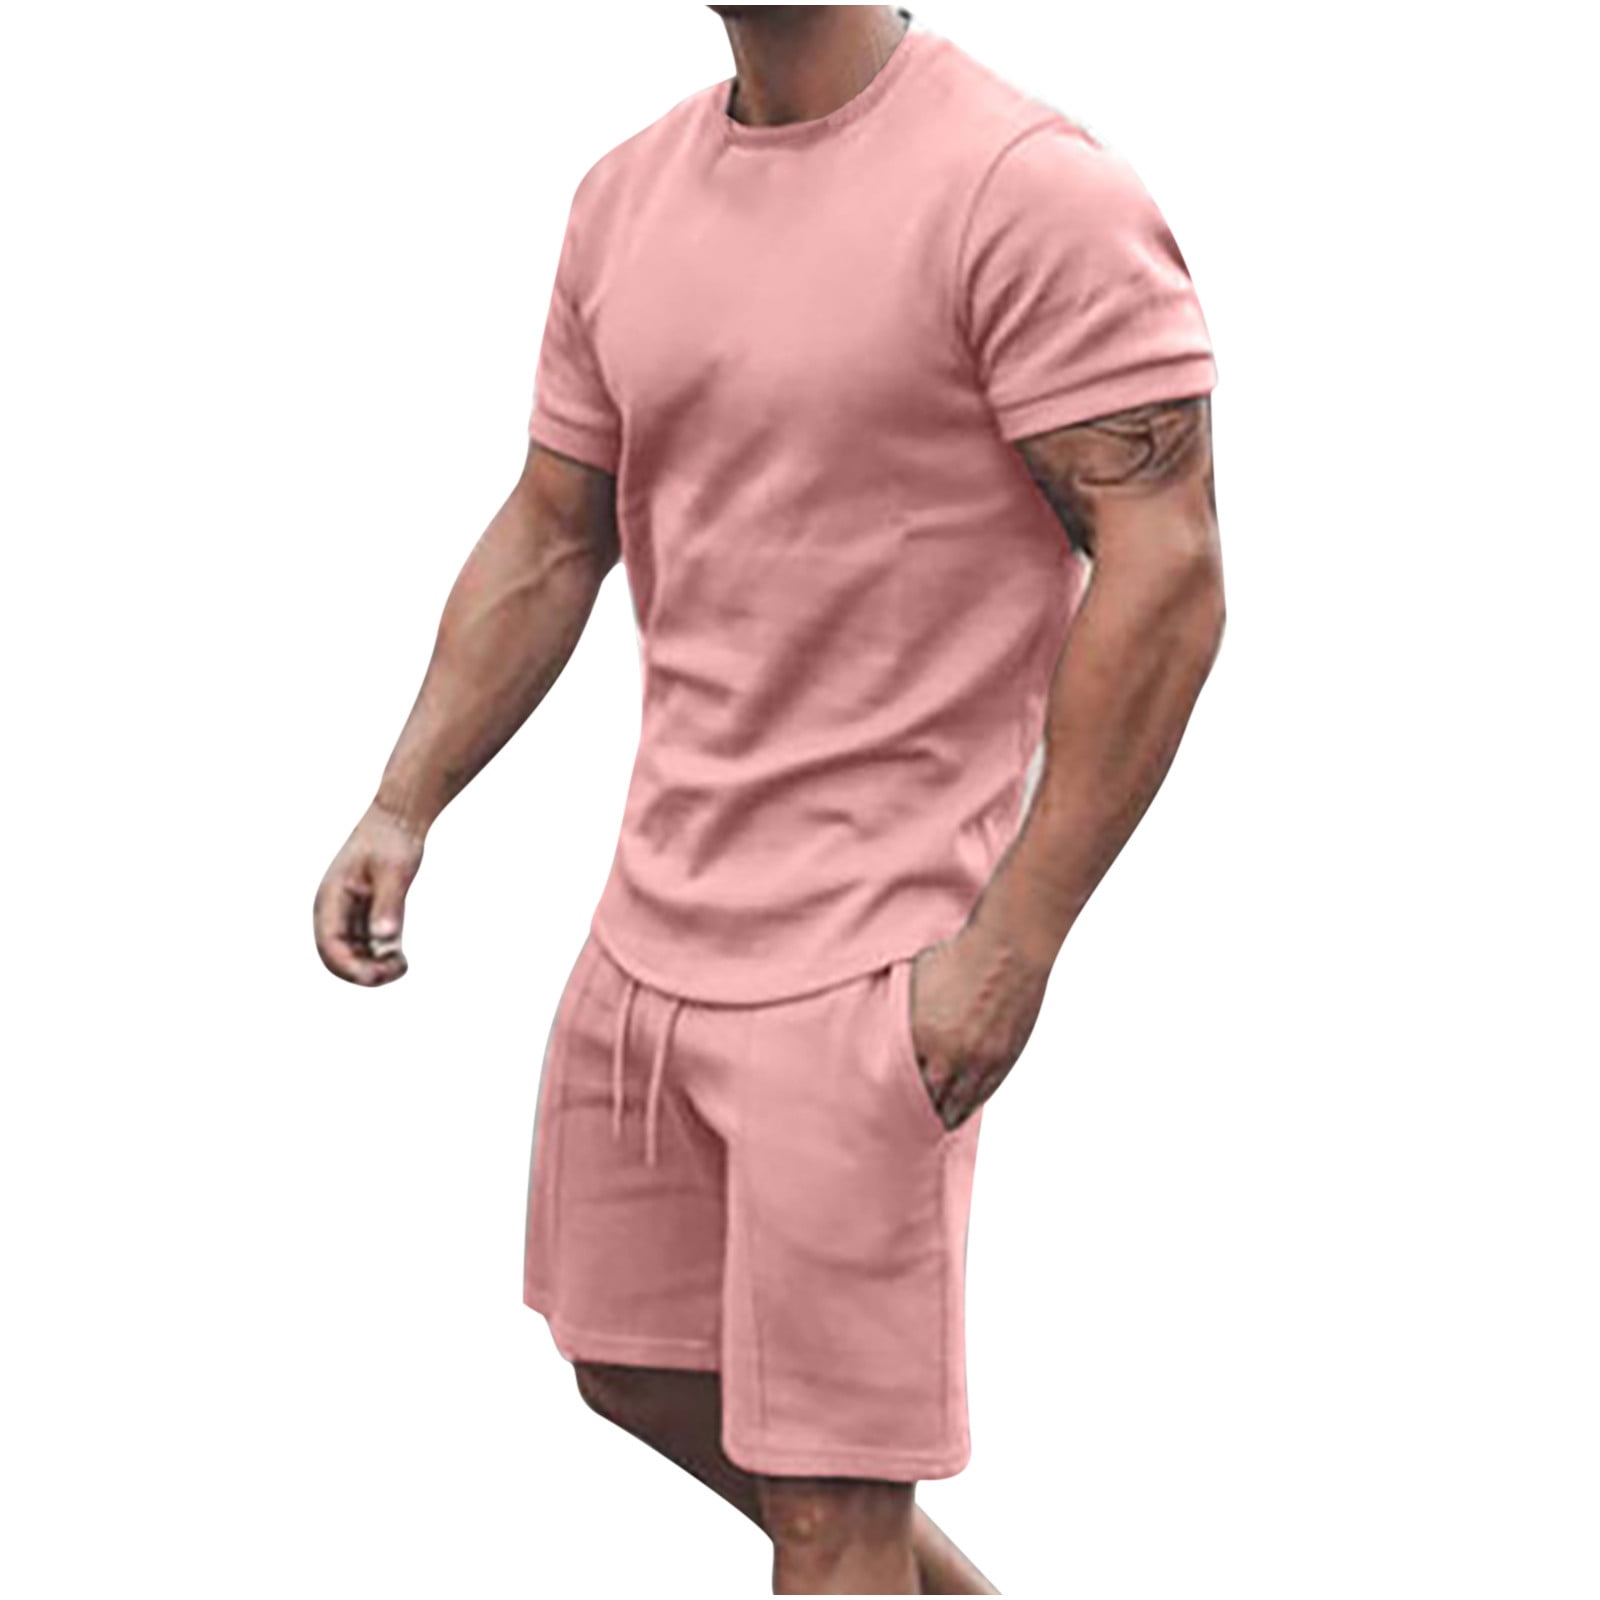 Lopecy-Sta Men 2 Piece Casual Short Sleeve Tee Shirts and Fit Sport Shorts Set Mens Outfits Mens Shirts Casual Discount Clearance Pink - Walmart.com